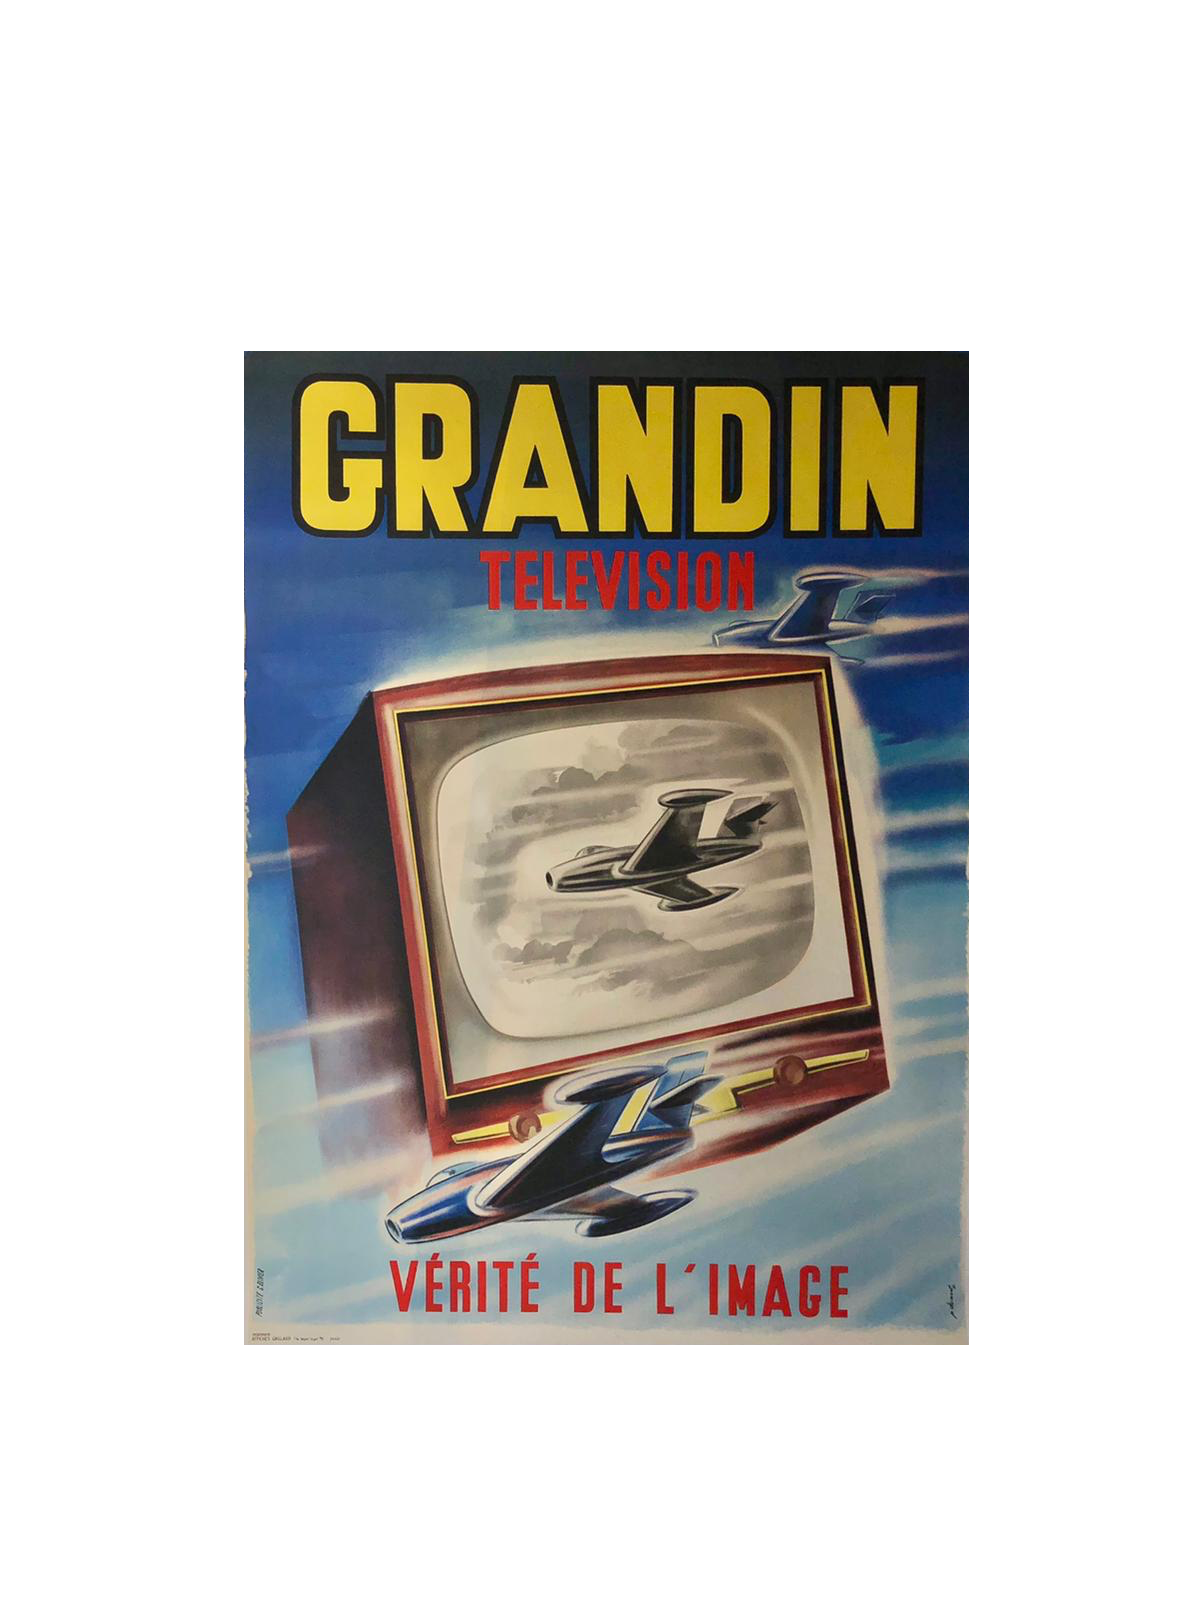 Grandin Televisions  by Dumont